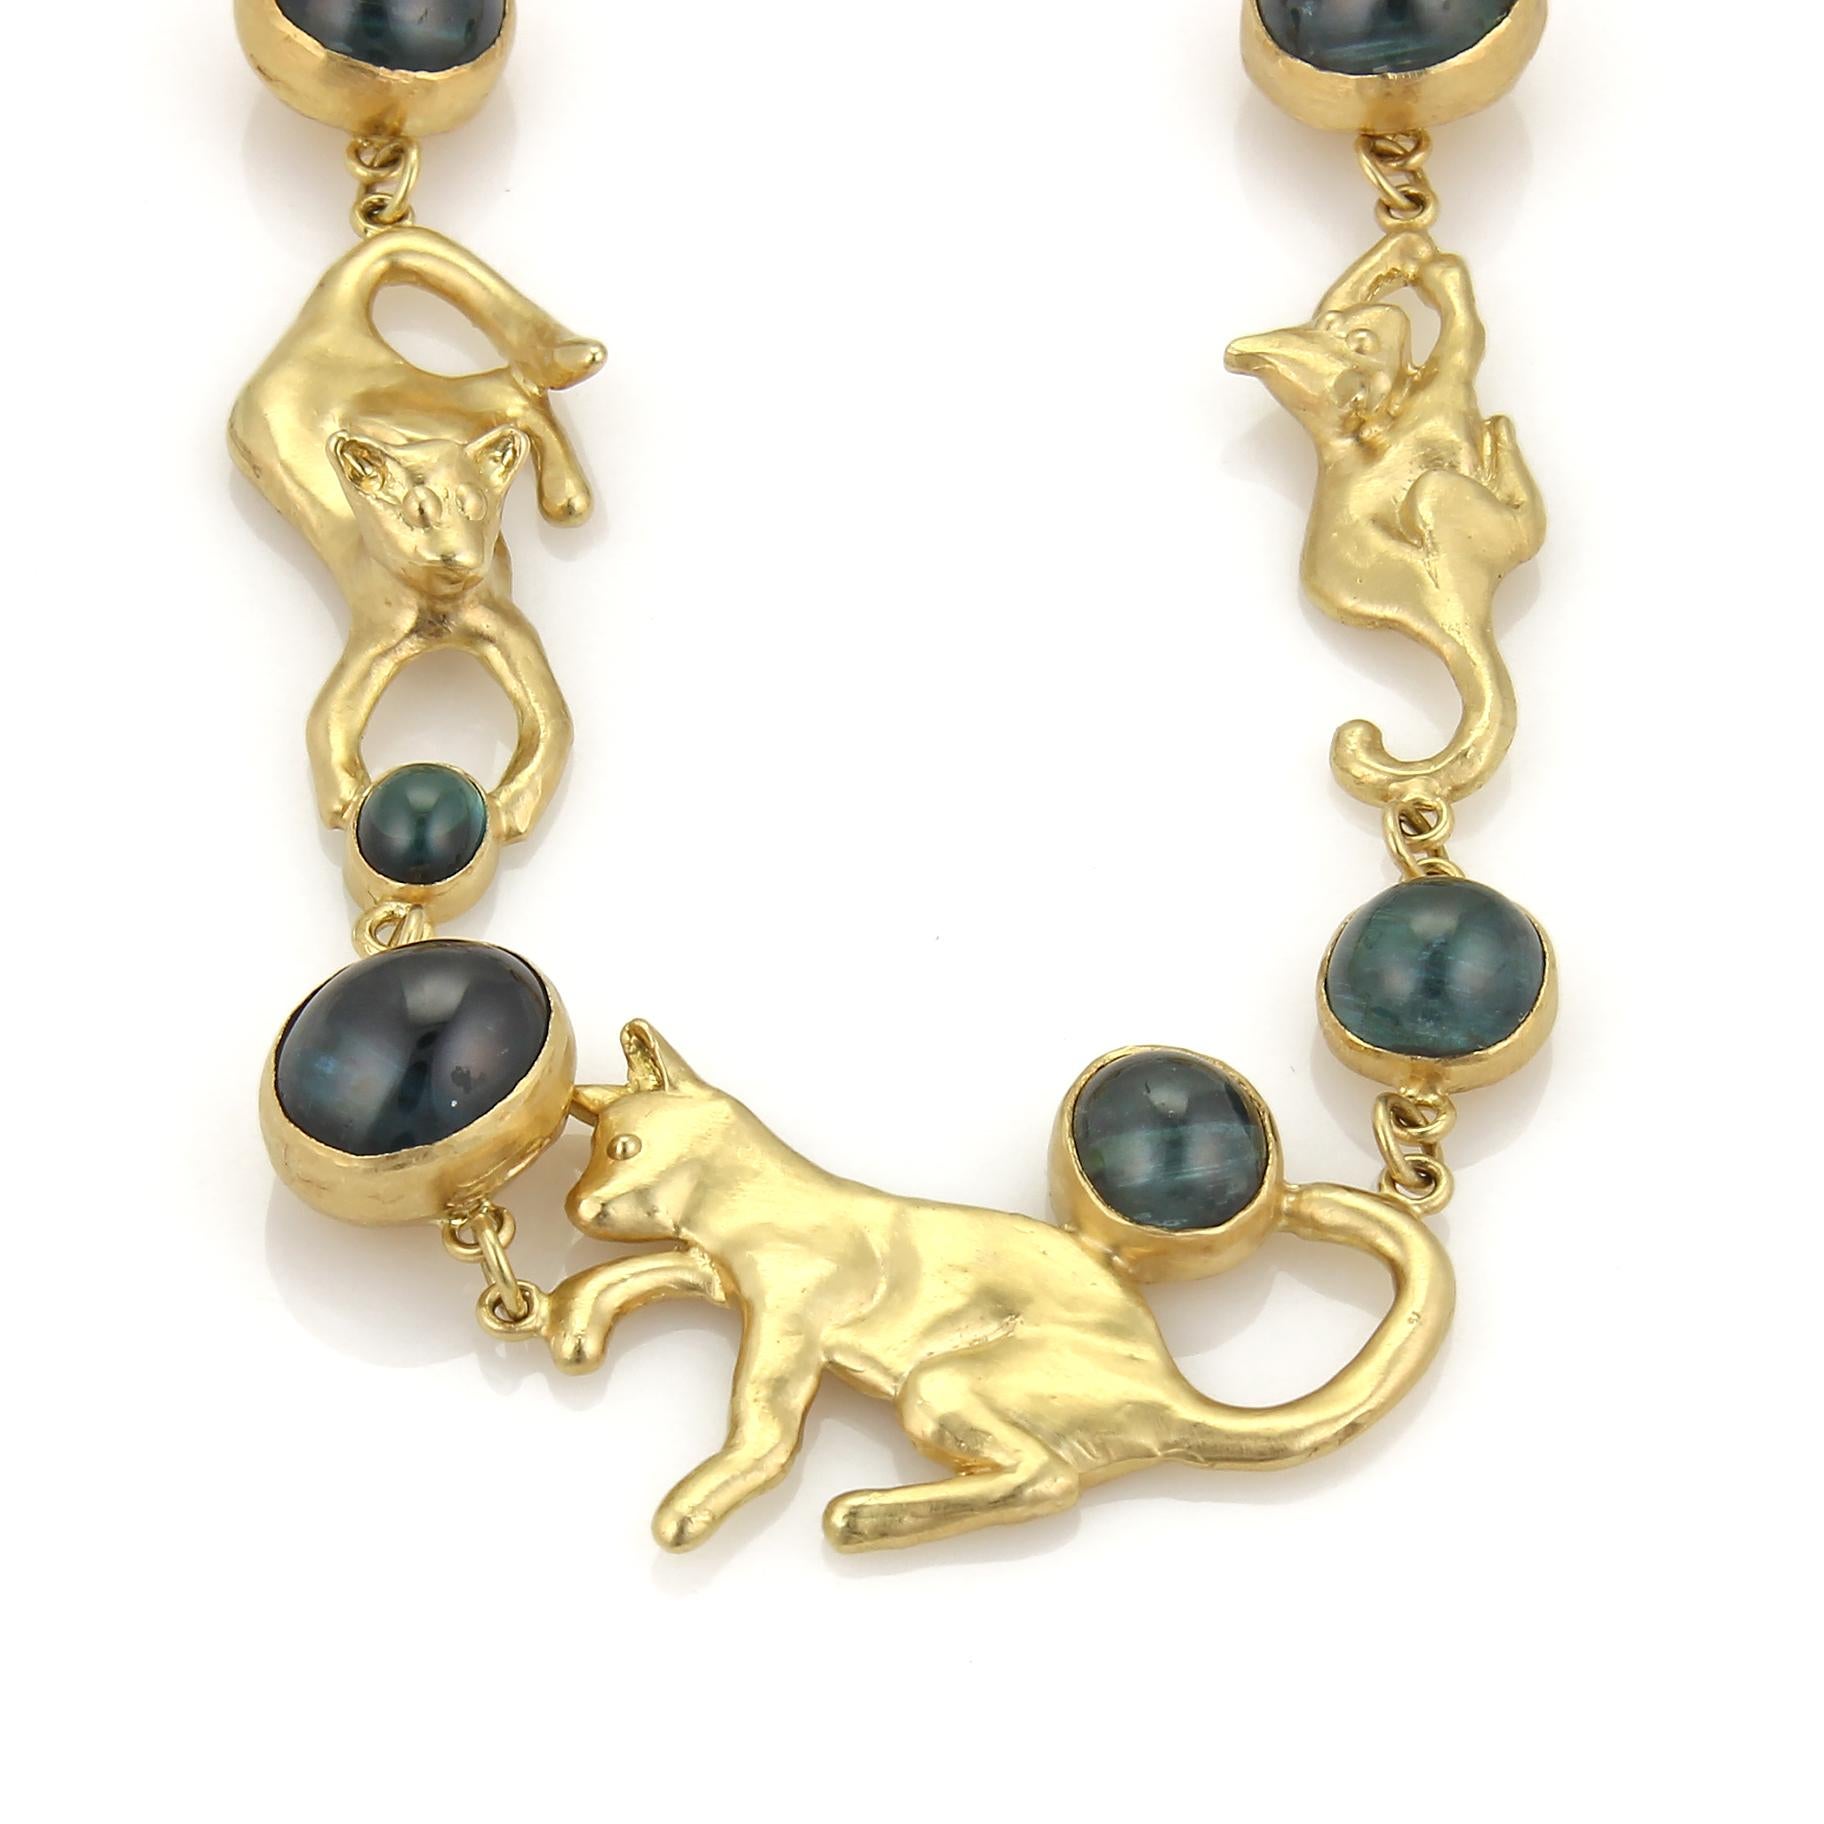 This in an impressive custom made adorable long necklace by Peter Aylen from the Aylen & Son Company , it is crafted from solid 18k yellow gold with a polished finish and has handmade full figure cats in various size, all in a playful position and